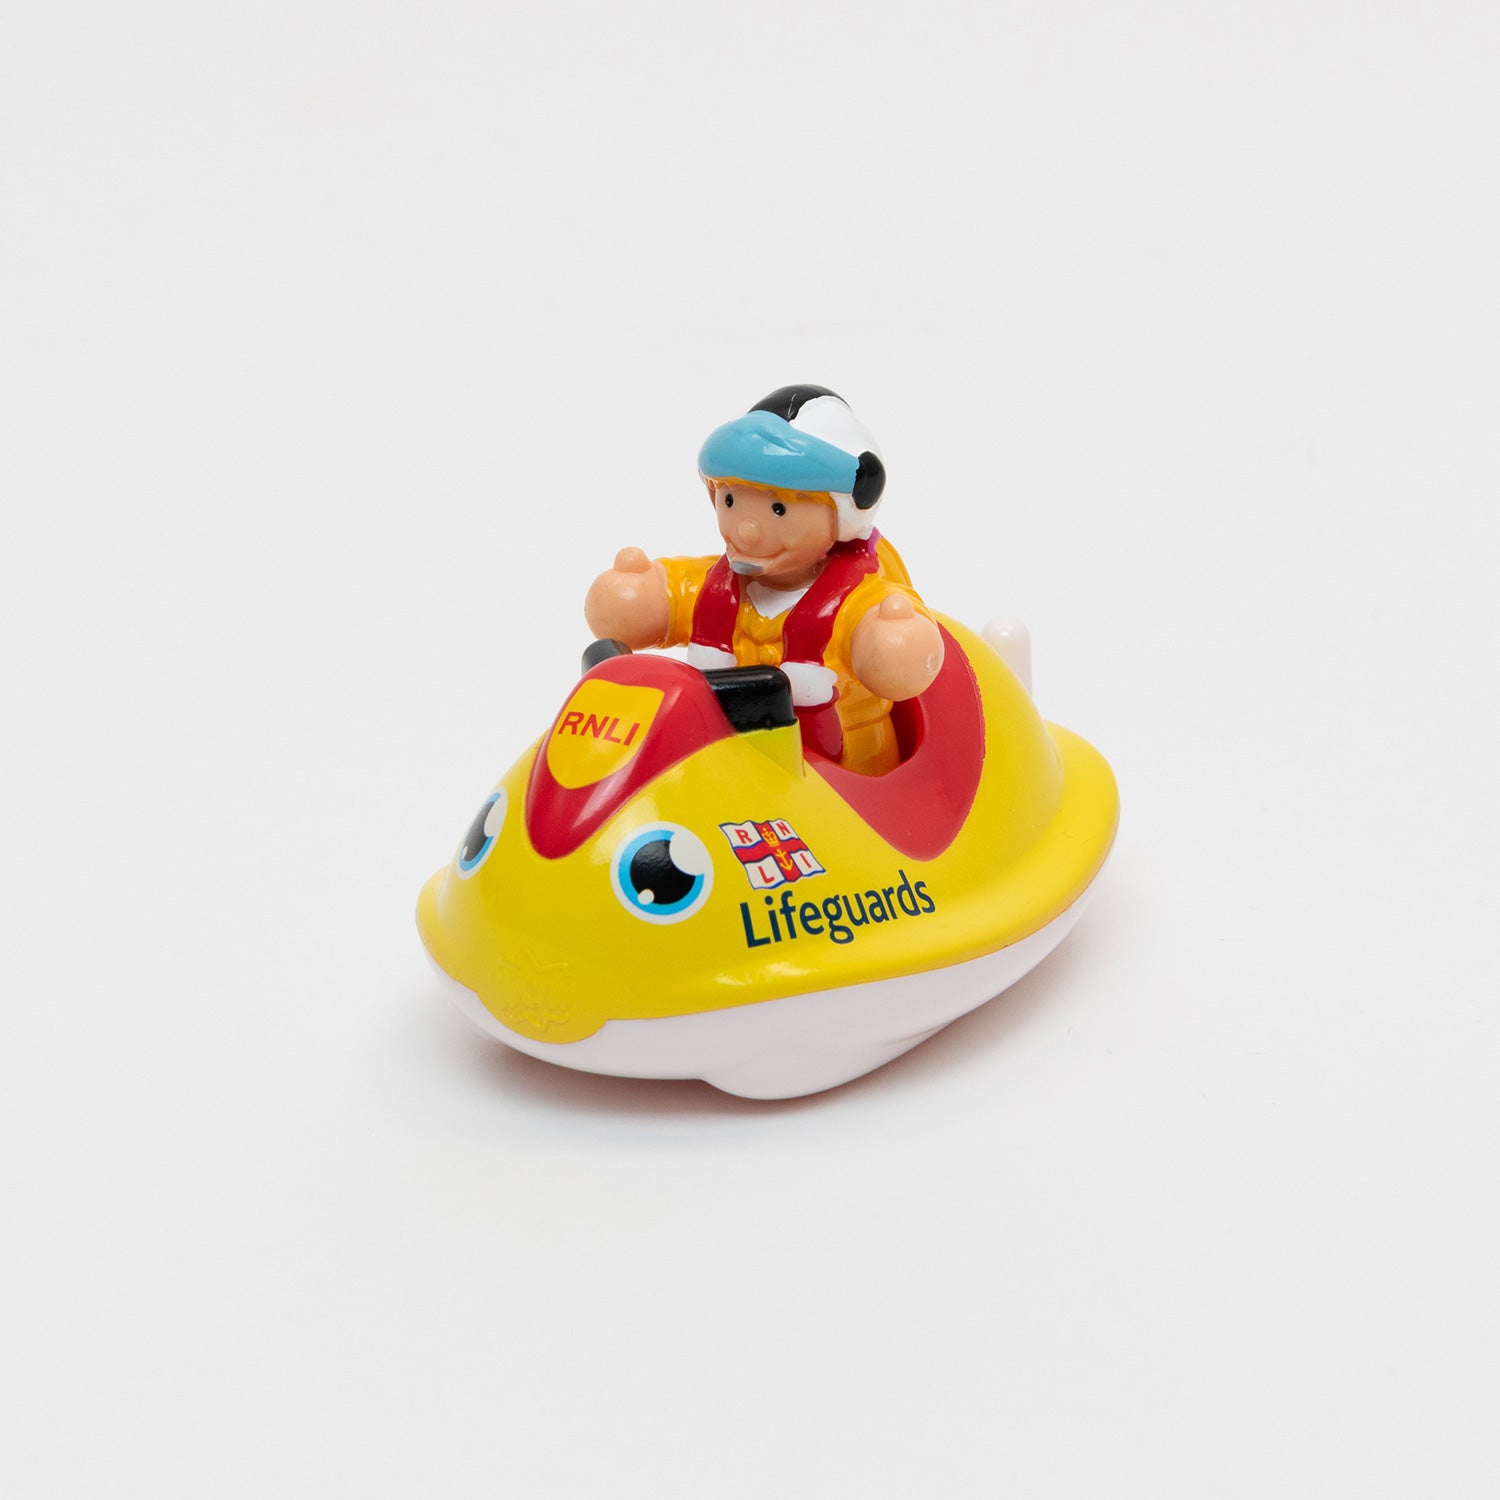 RNLI Lifegaurd Lucy Bath Toy.  Yellow and Red cartoon lifesaving jetski toy with detachable RNLI team member Lucy in her yellow waterproofs and helmet sat on top.